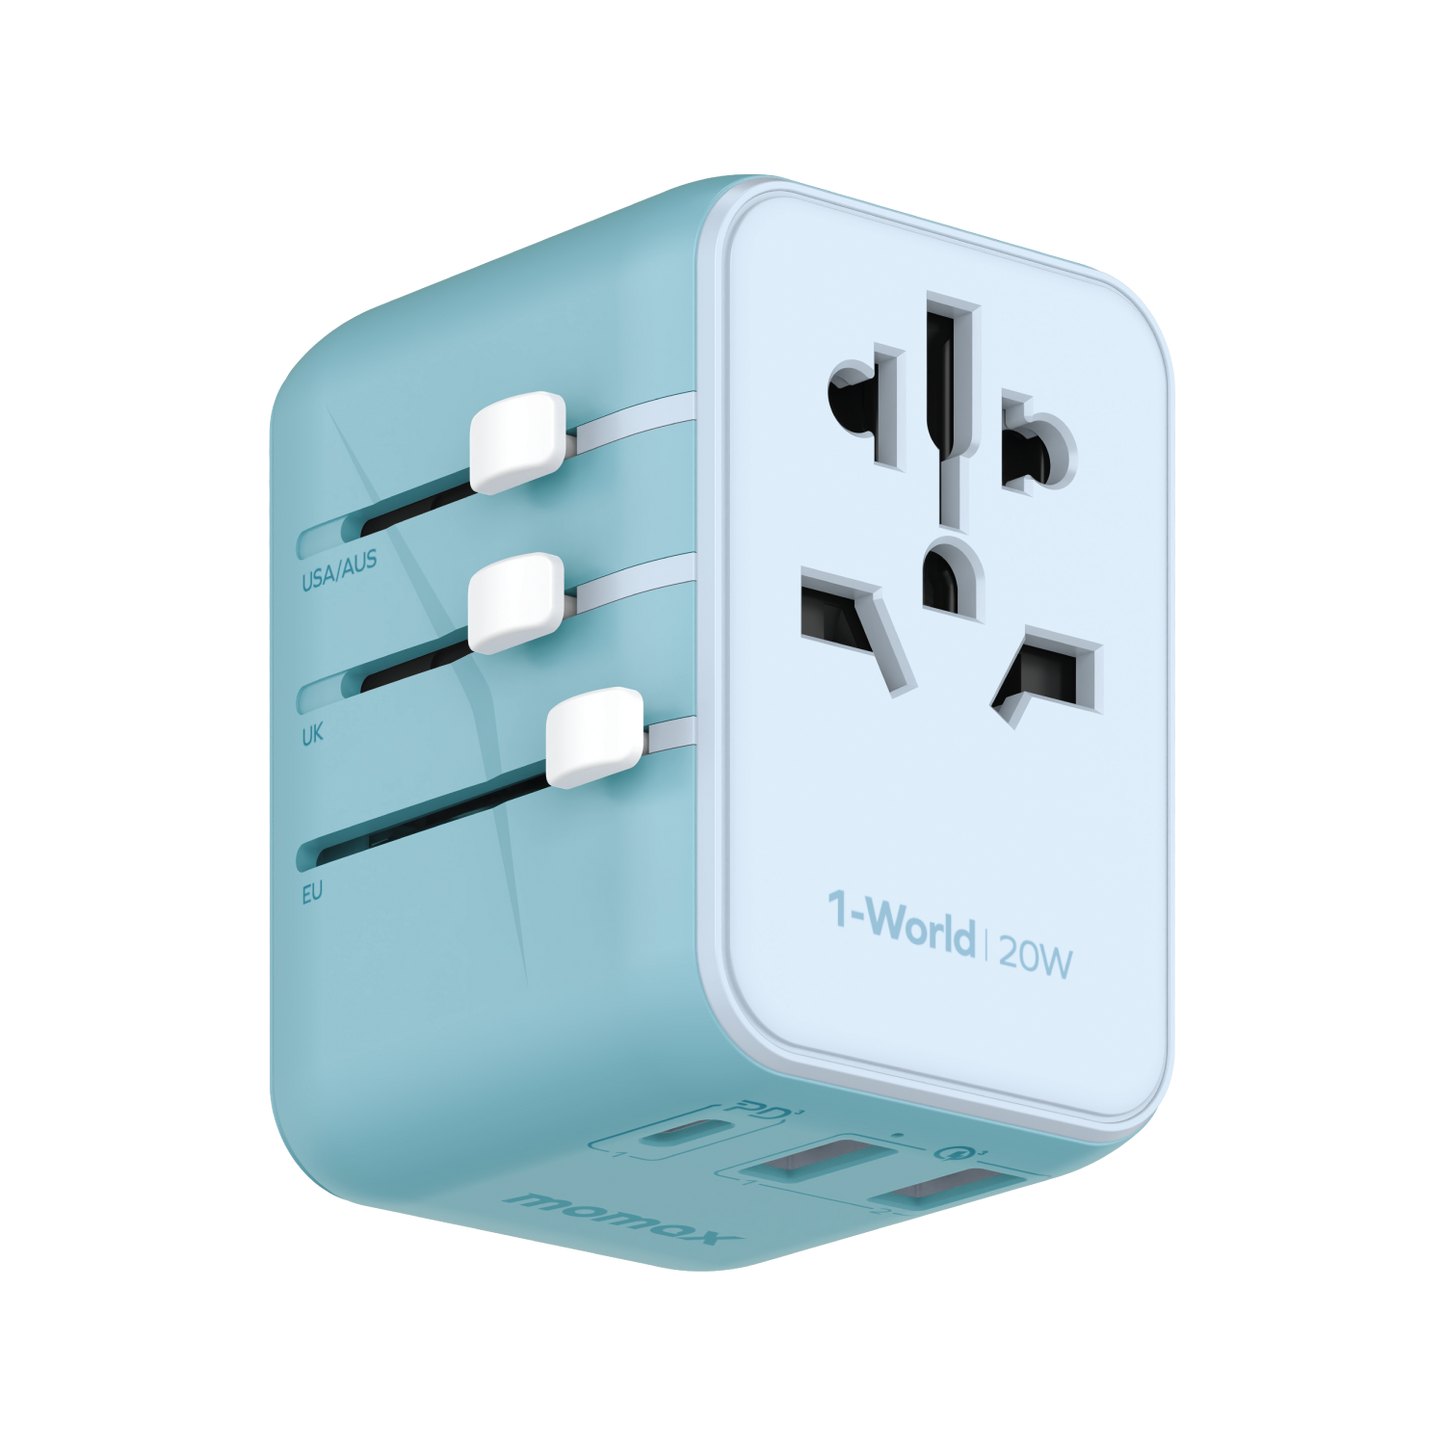 MOMAX 1-World 20W 3-Port + AC Charger Travel Adapter